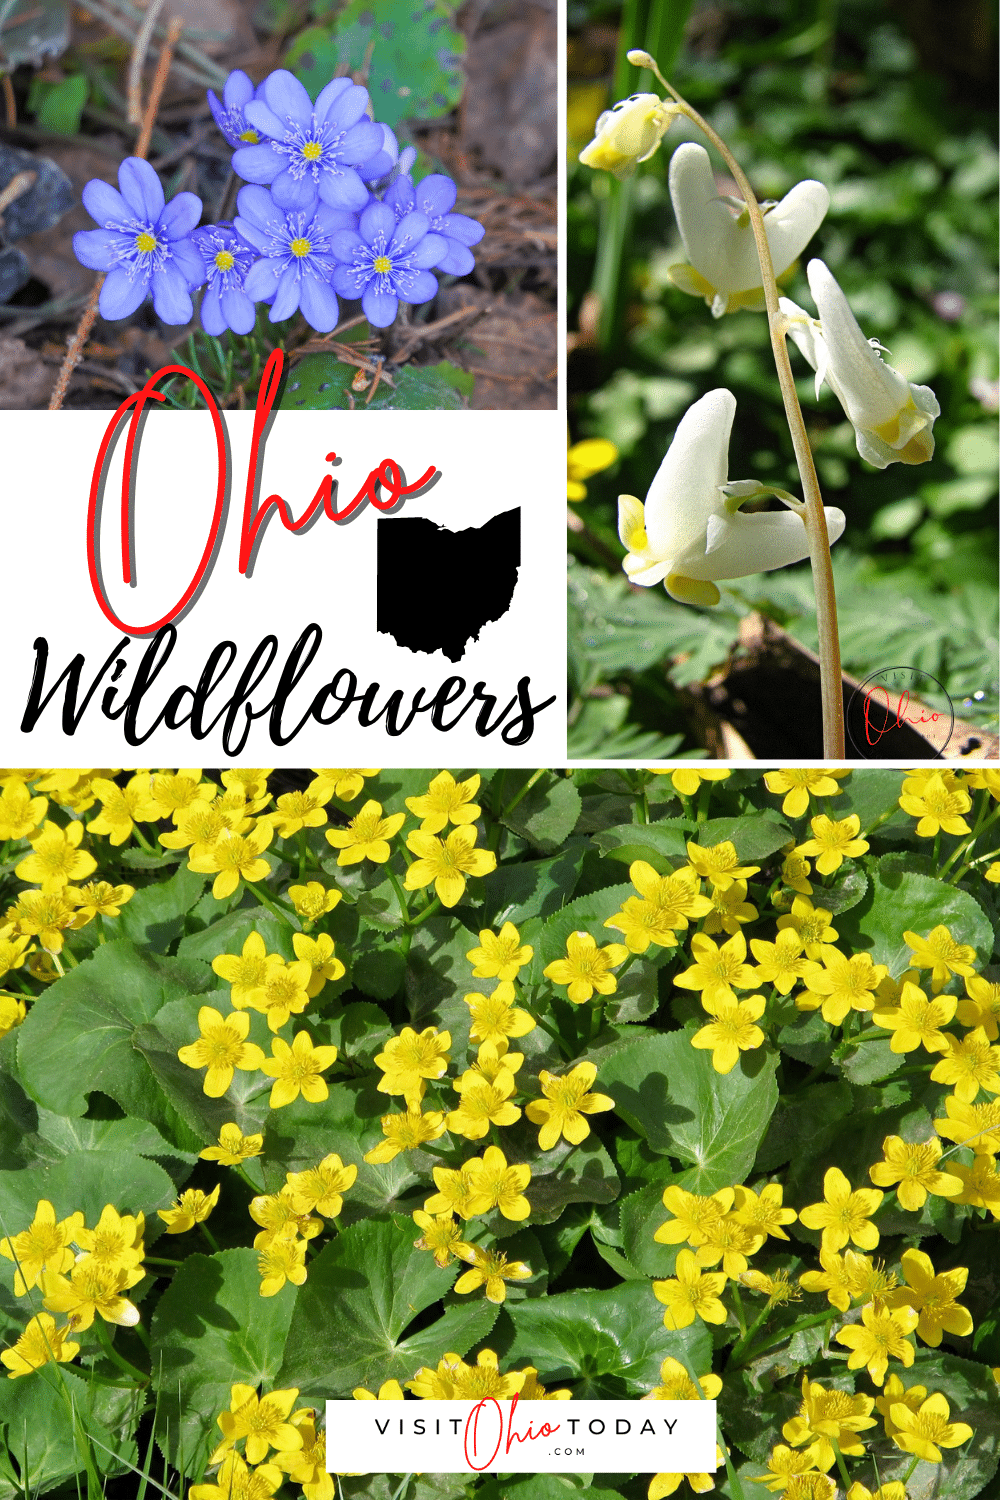 If you want to see some lovely wildflowers in Ohio, then you will need to be quick. If you are in Southern Ohio, then the season starts in early April and if you’re in Northern Ohio, the season starts in early May, and the season for Ohio wildflowers is very short.